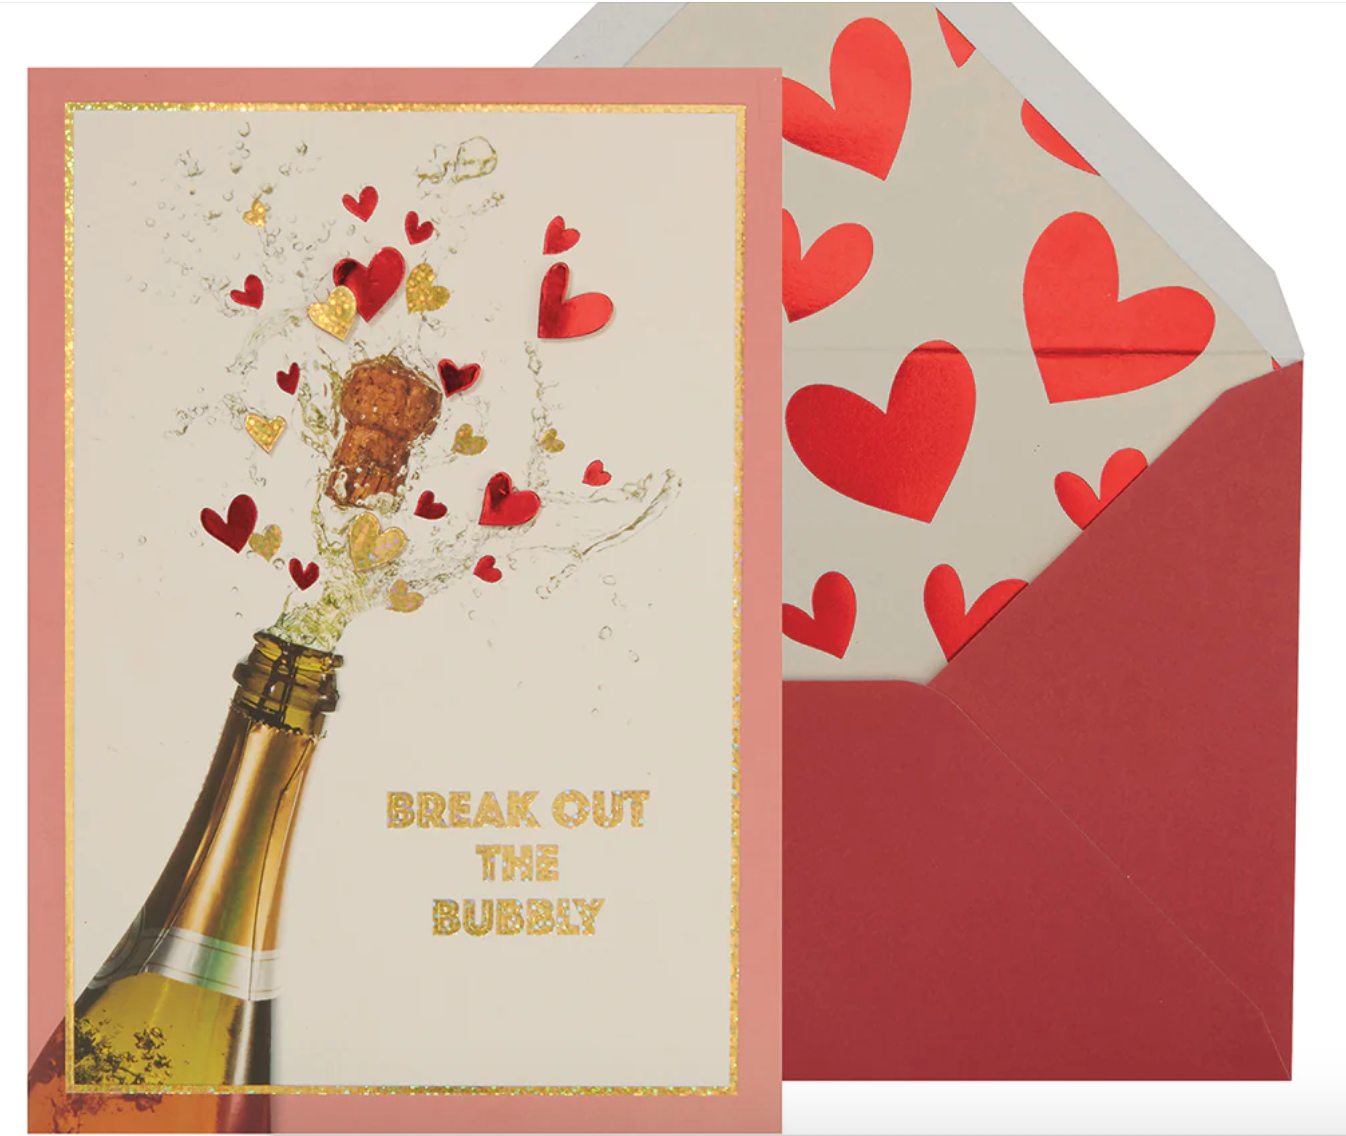 CHAMPAGNE BOTTLE AND HEARTS VALENTINE'S DAY